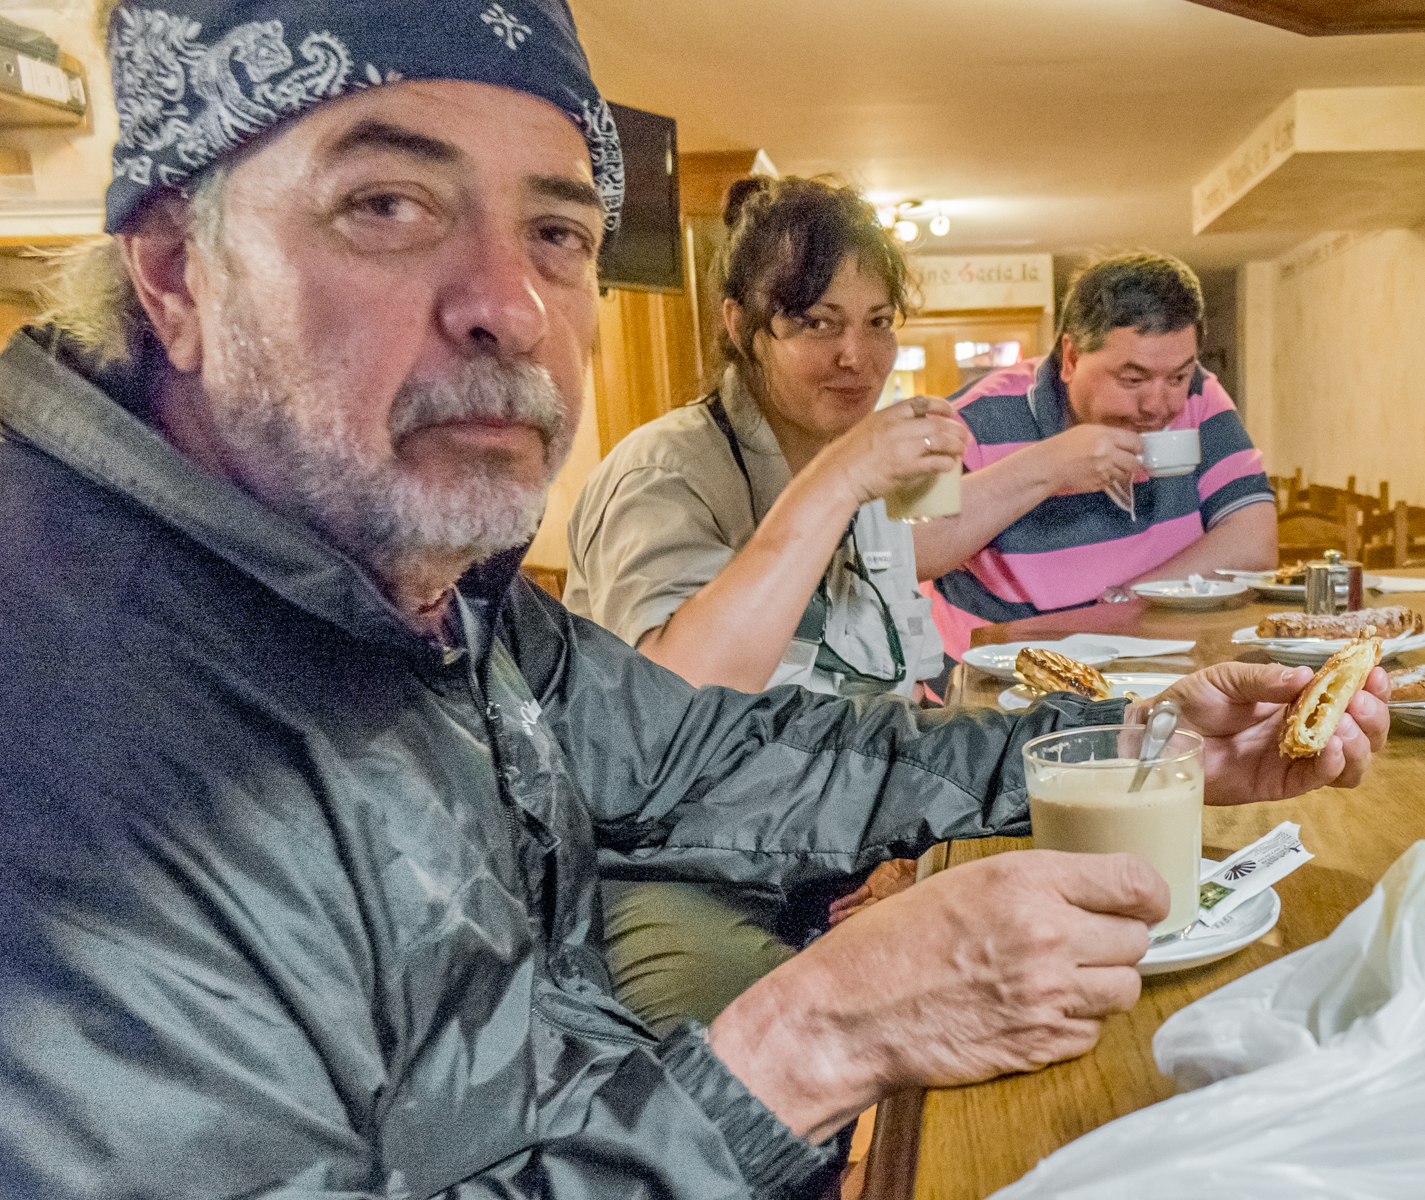 Camino pilgrims enjoy early morning coffee and pastry at a cafe in Redecilla del Camino, Spain | Photo by Mike Hudak